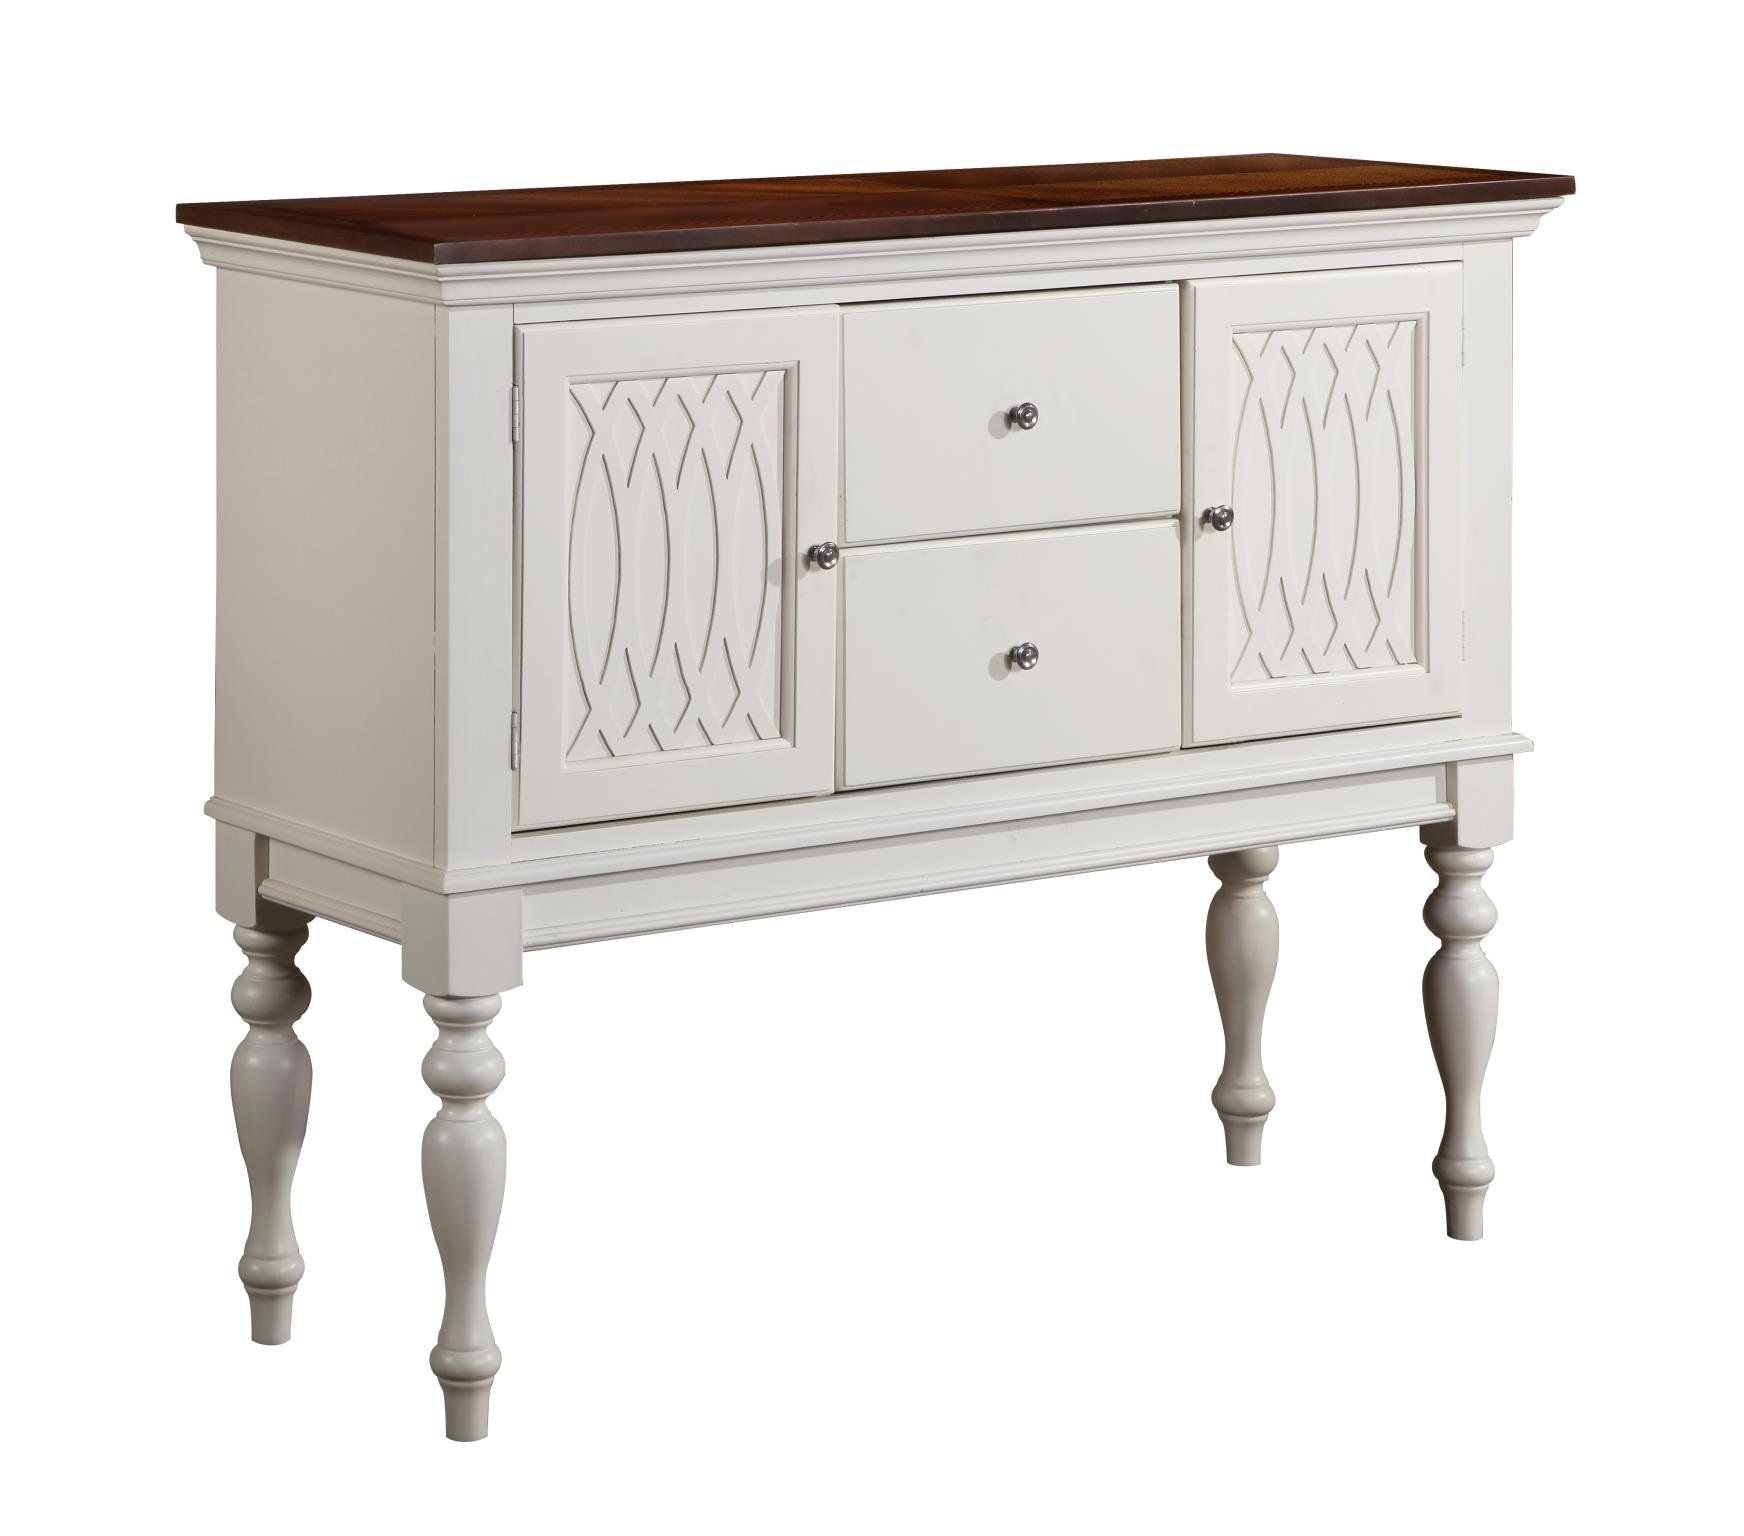 Hillenbrand Upholstered Buffet Table With Most Up To Date Pineville Dining Sideboards (View 13 of 20)